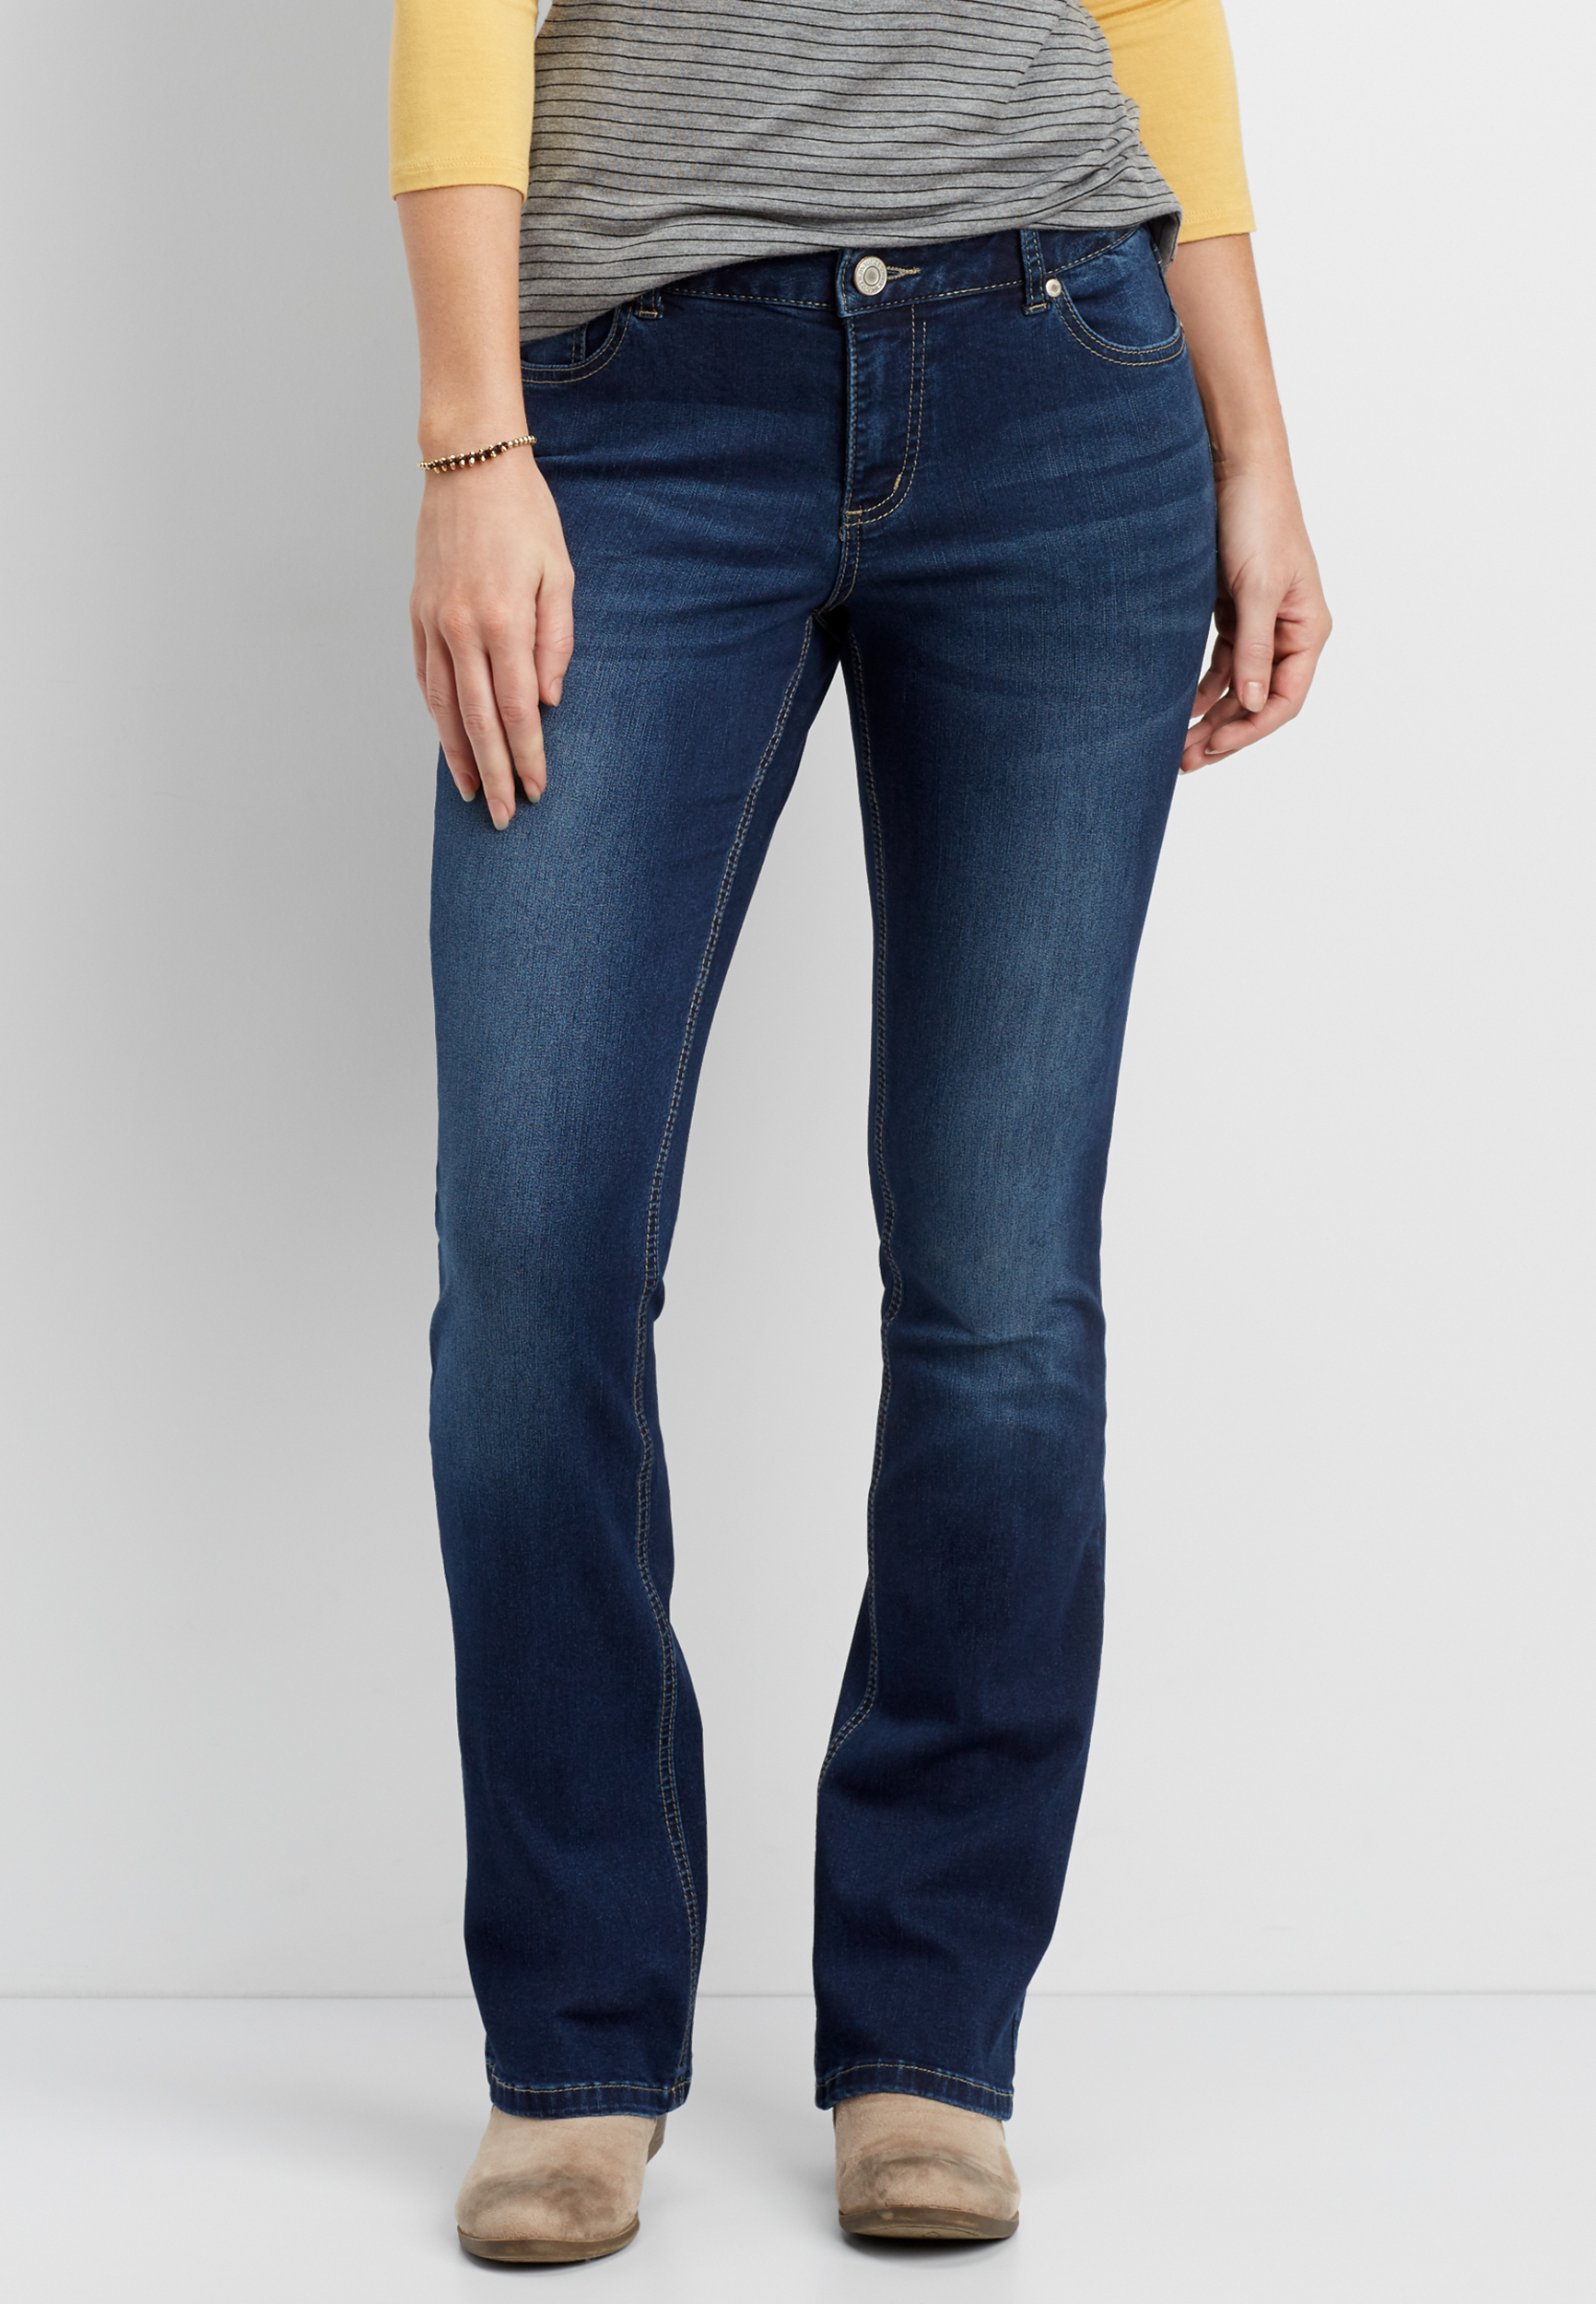 maurices jeans price